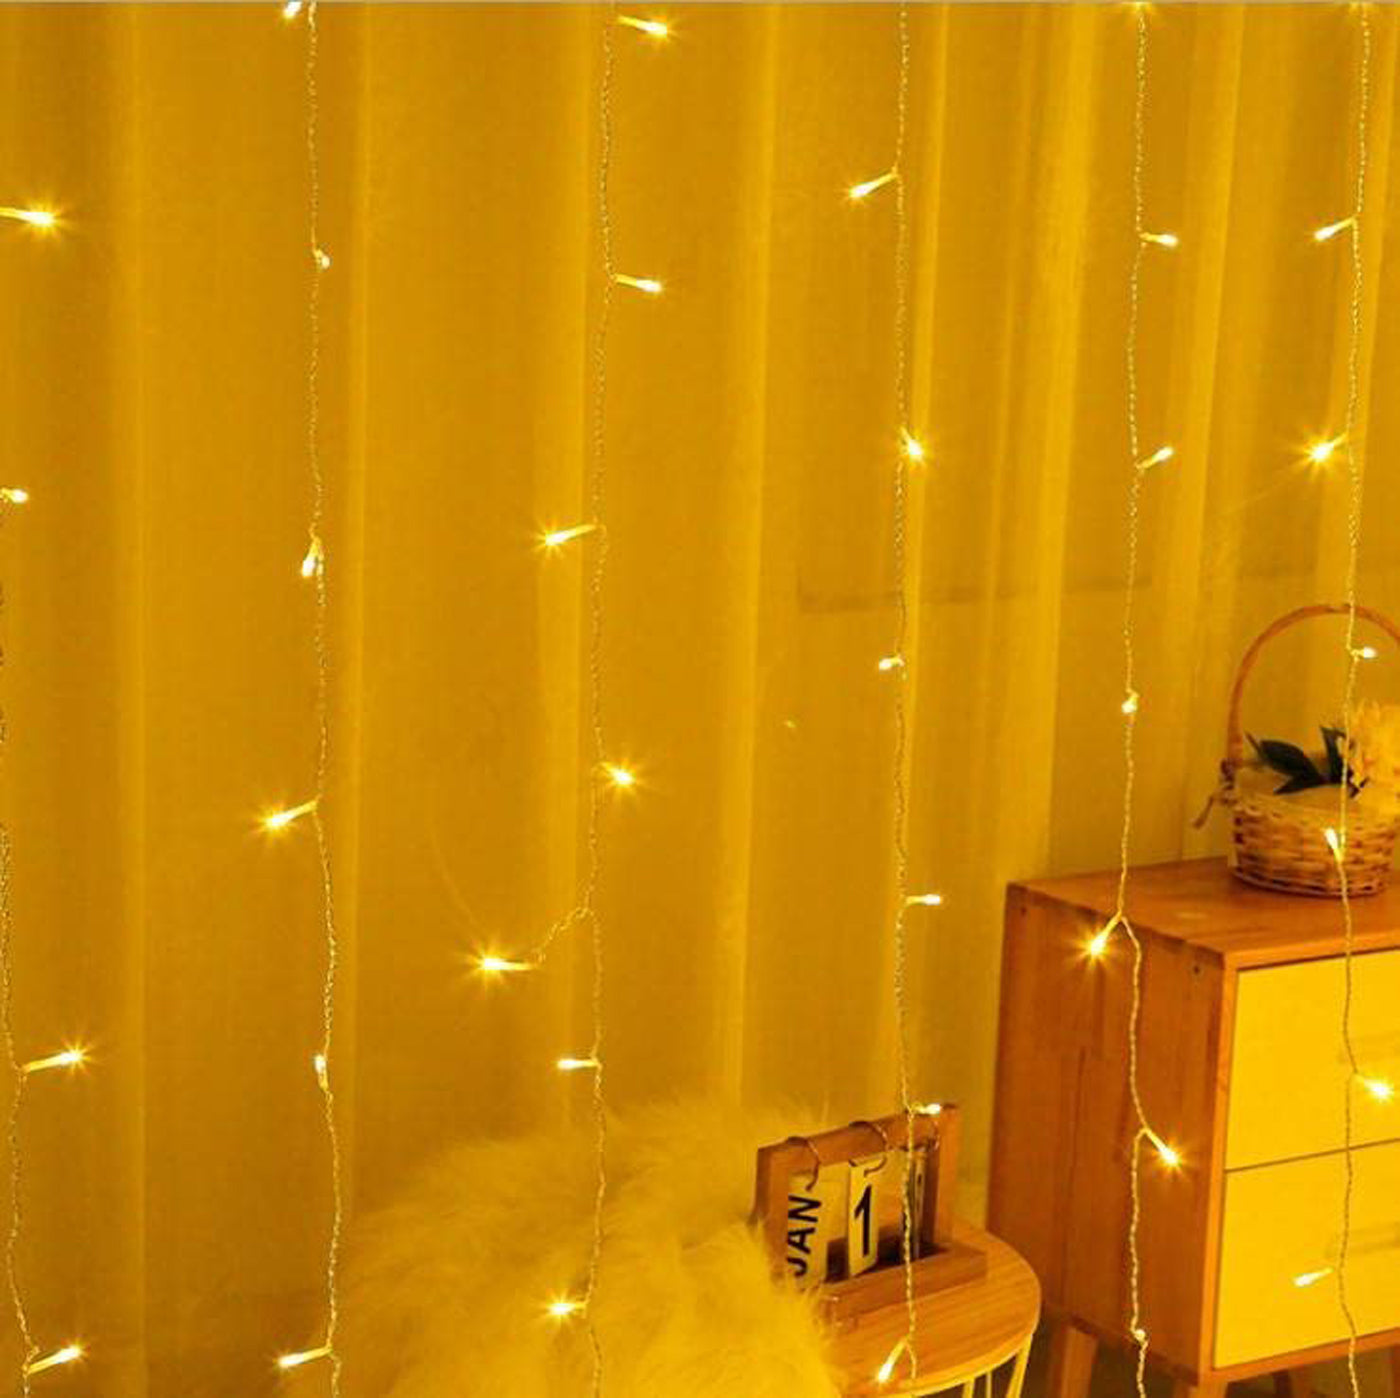 DecorTwist LED Fountain Rice Light for Wall Decor| Home Decoration| Diwali Item| Christmas Item| Indoor & Outdoor Decoration Item| | Festival Item | 3.05 MTR |280 LED Bulb (Yellow)